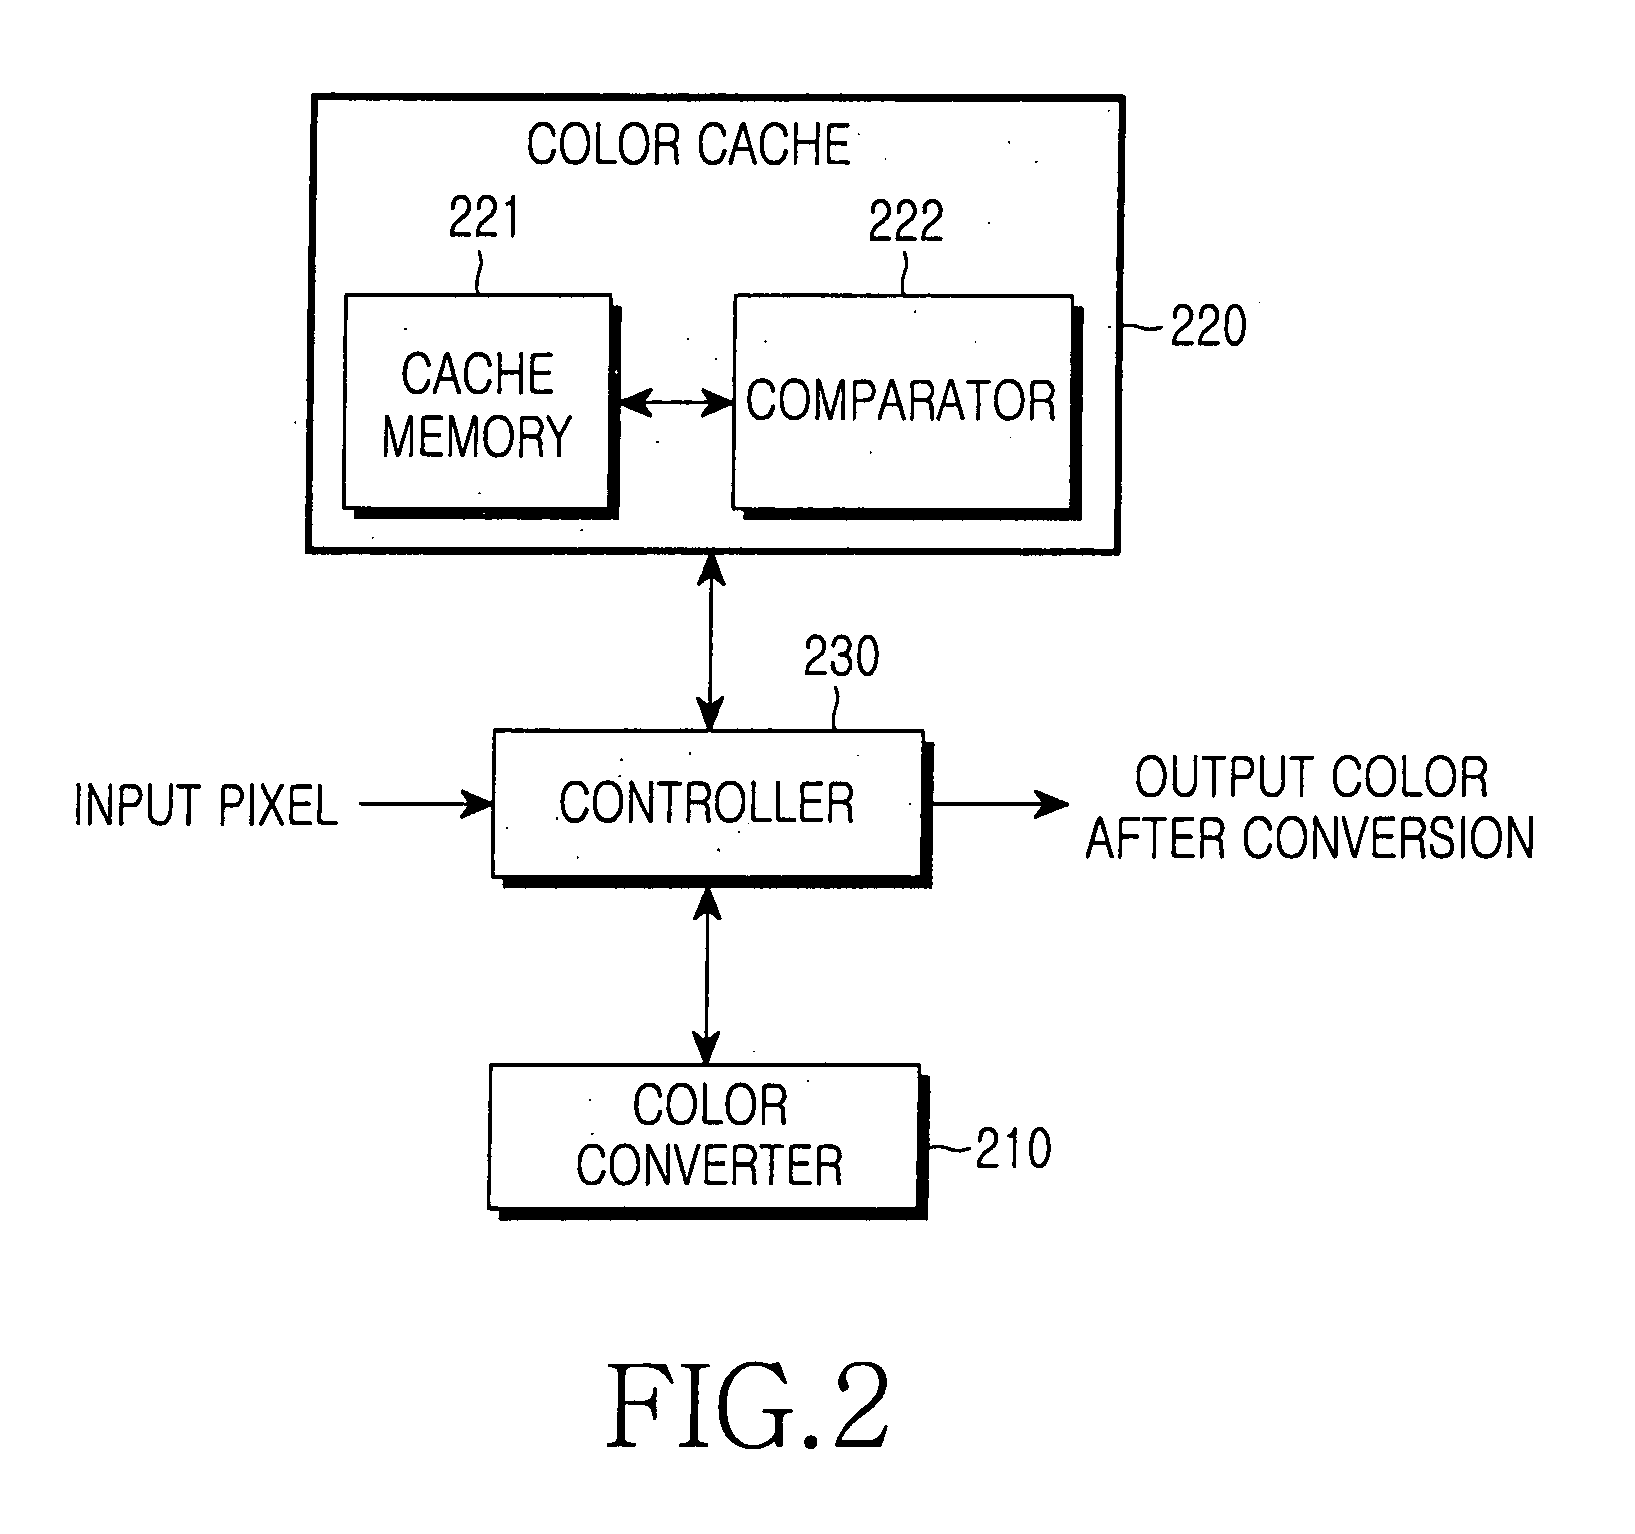 Apparatus and method for performing color conversion using color cache in image processing system